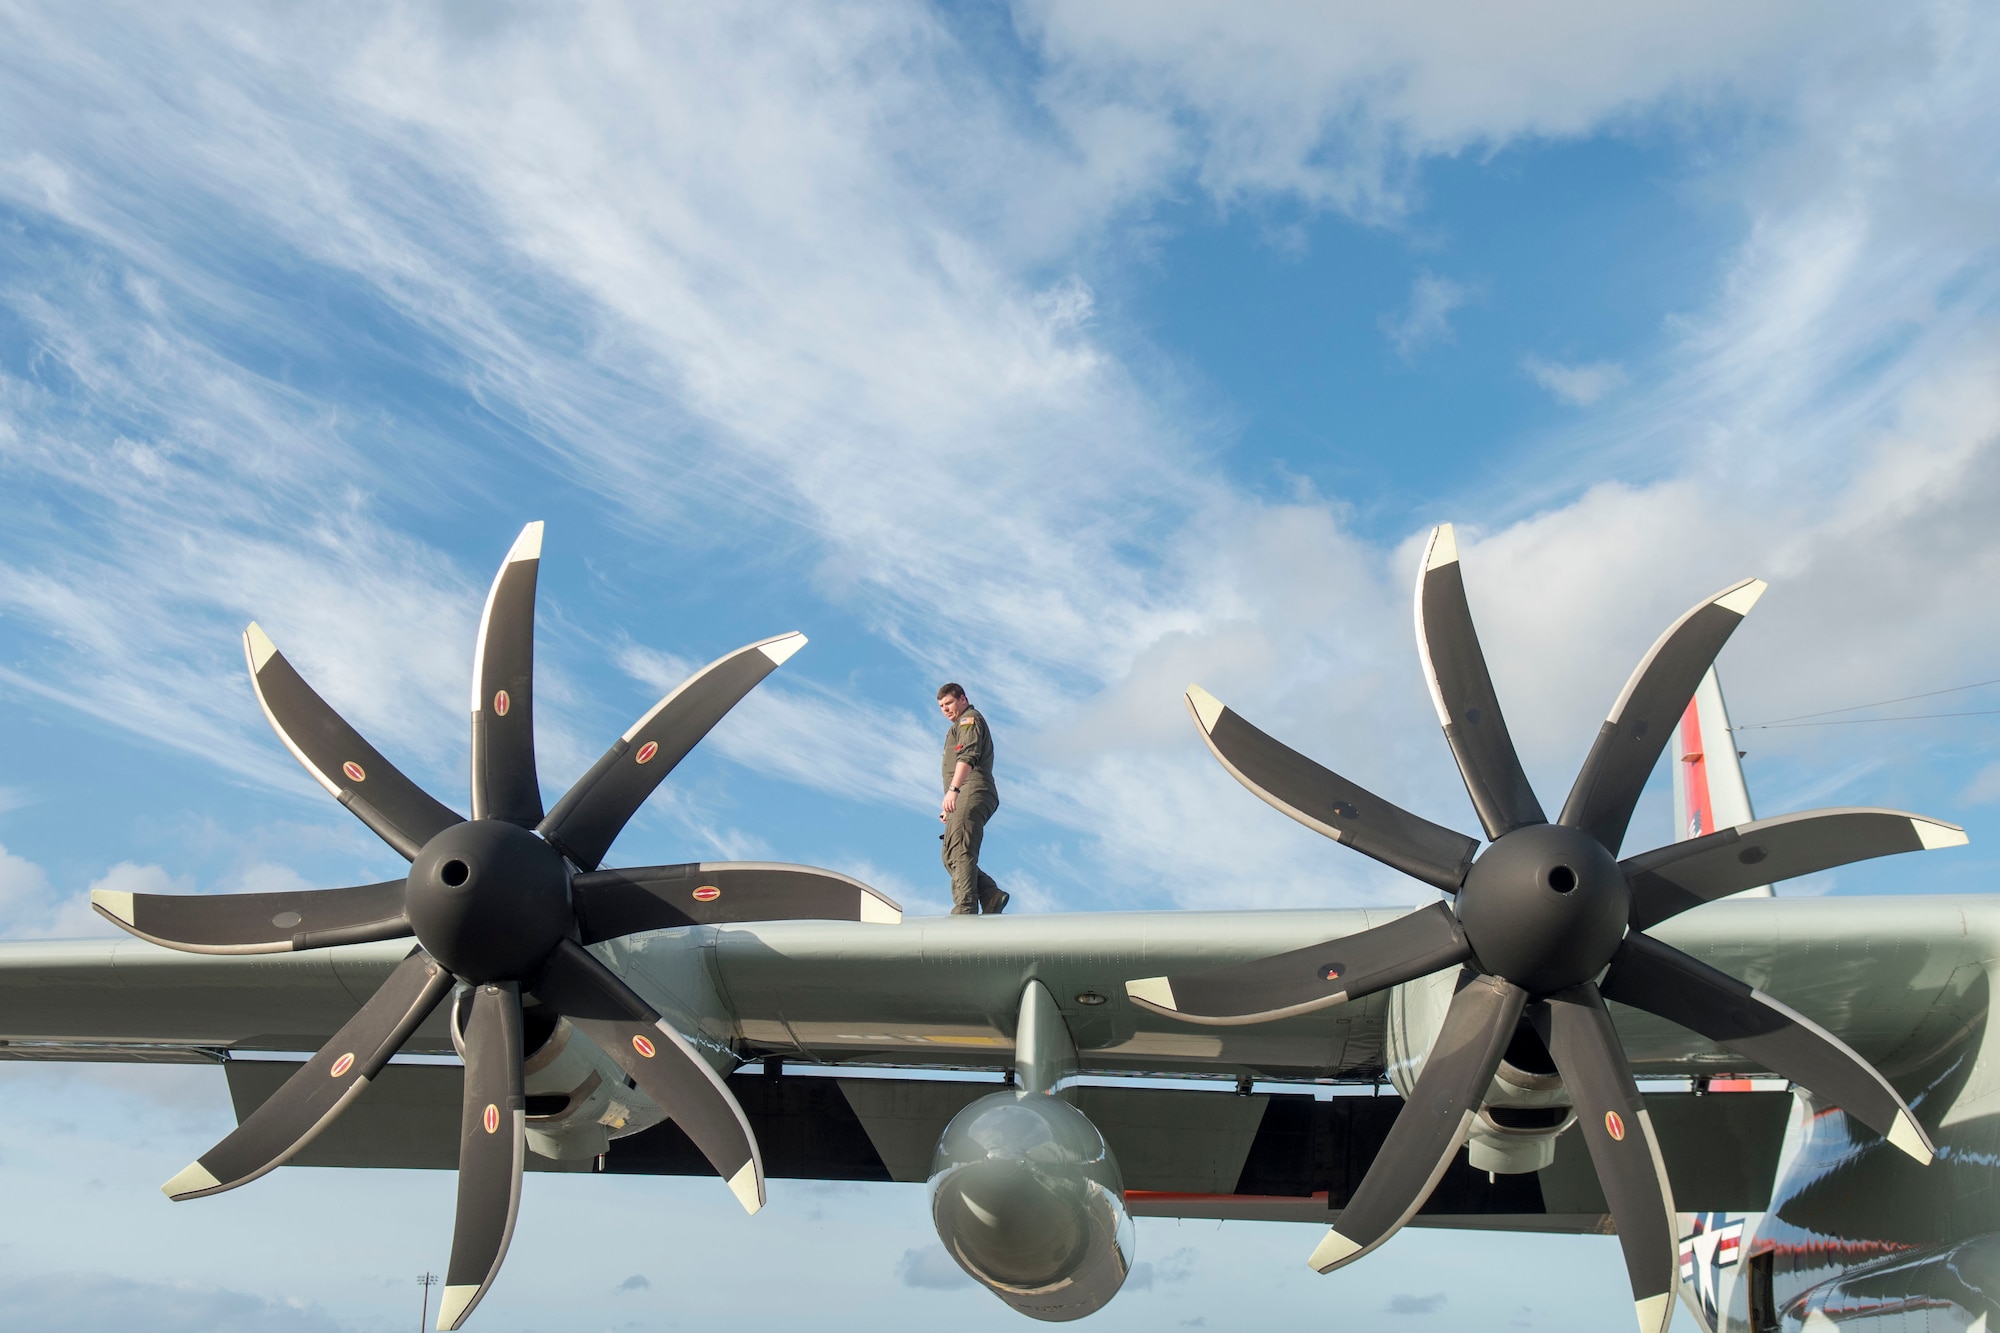 An Airman assigned to the 109th Airlift Wing, Stratton Air National Guard Base, New York, performs pre-flight inspections on an LC-130 Hercules on the flightline at Joint Base Pearl Harbor-Hickam, Hawaii, March 7, 2020. The crew was supporting Operation DEEP FREEZE. Due to Antarctica’s austere environment, Operation DEEP FREEZE is one of the most difficult peacetime missions the U.S military conducts. (U.S. Air Force photo by Staff Sgt. Mikaley Kline)